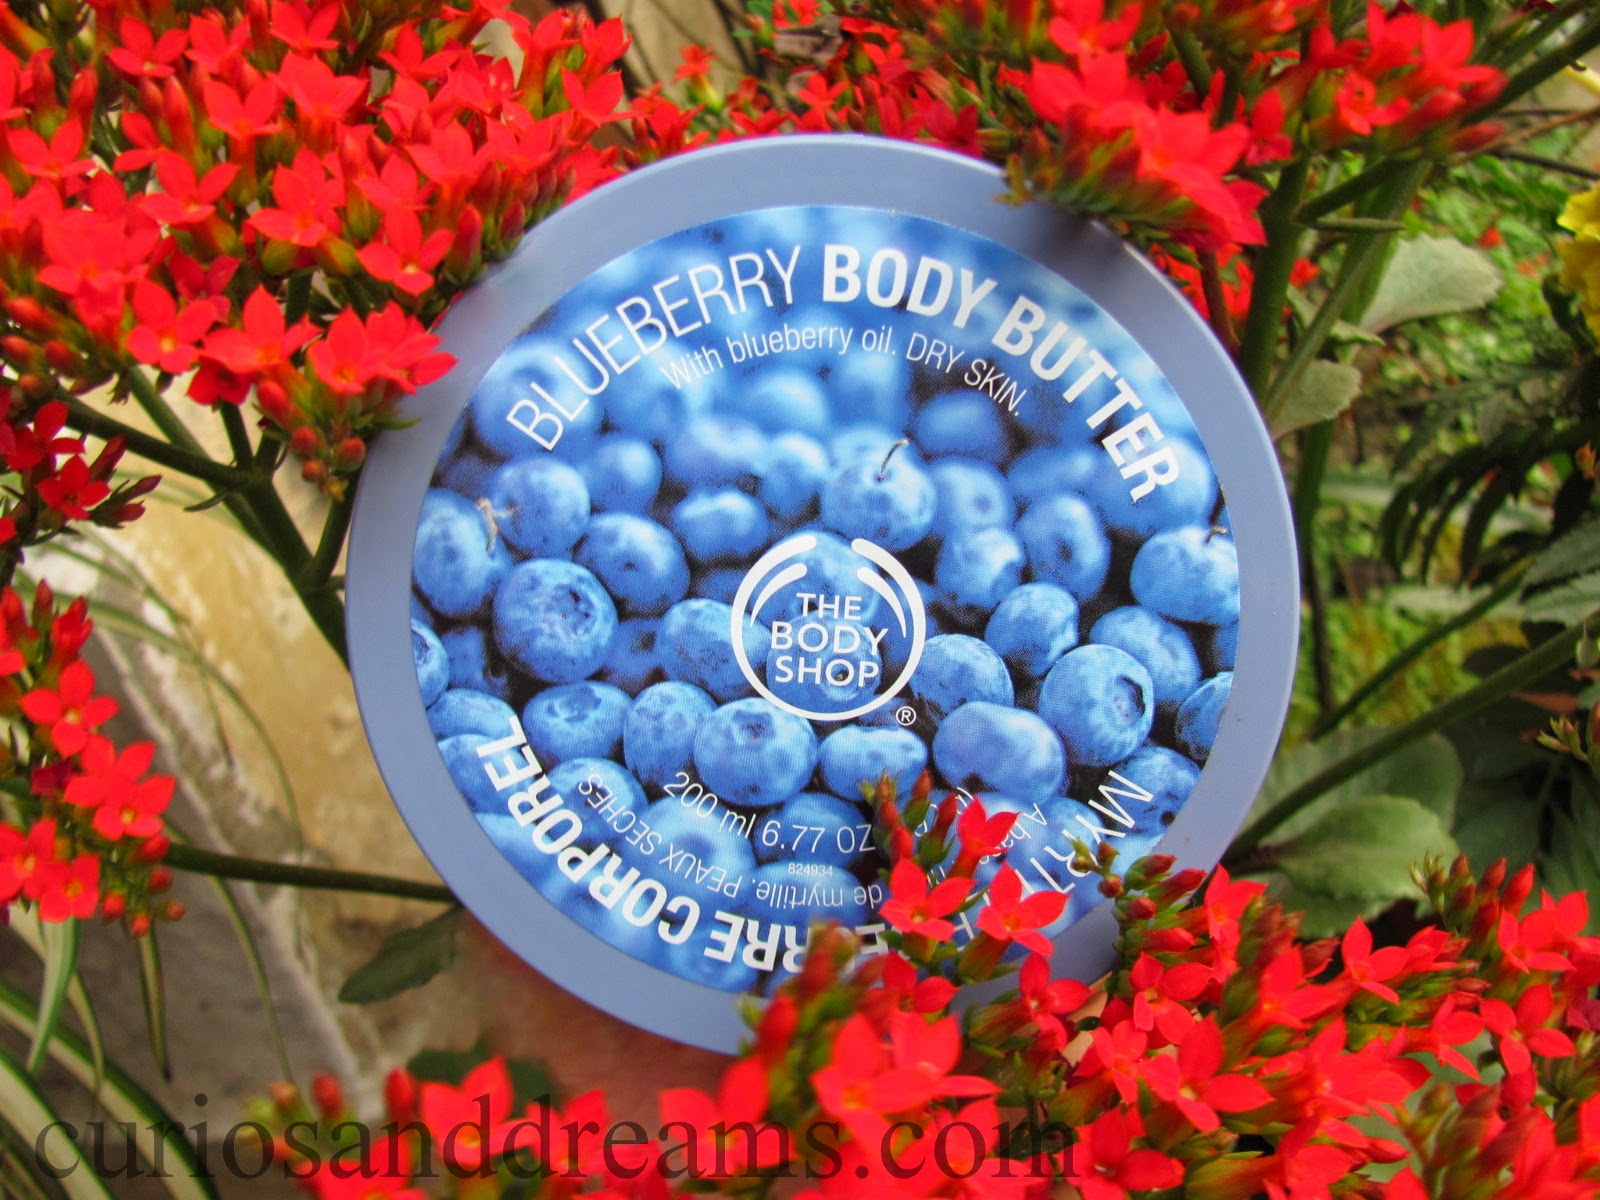 The Body Shop Blueberry Body Butter review, Blueberry Body Butter review